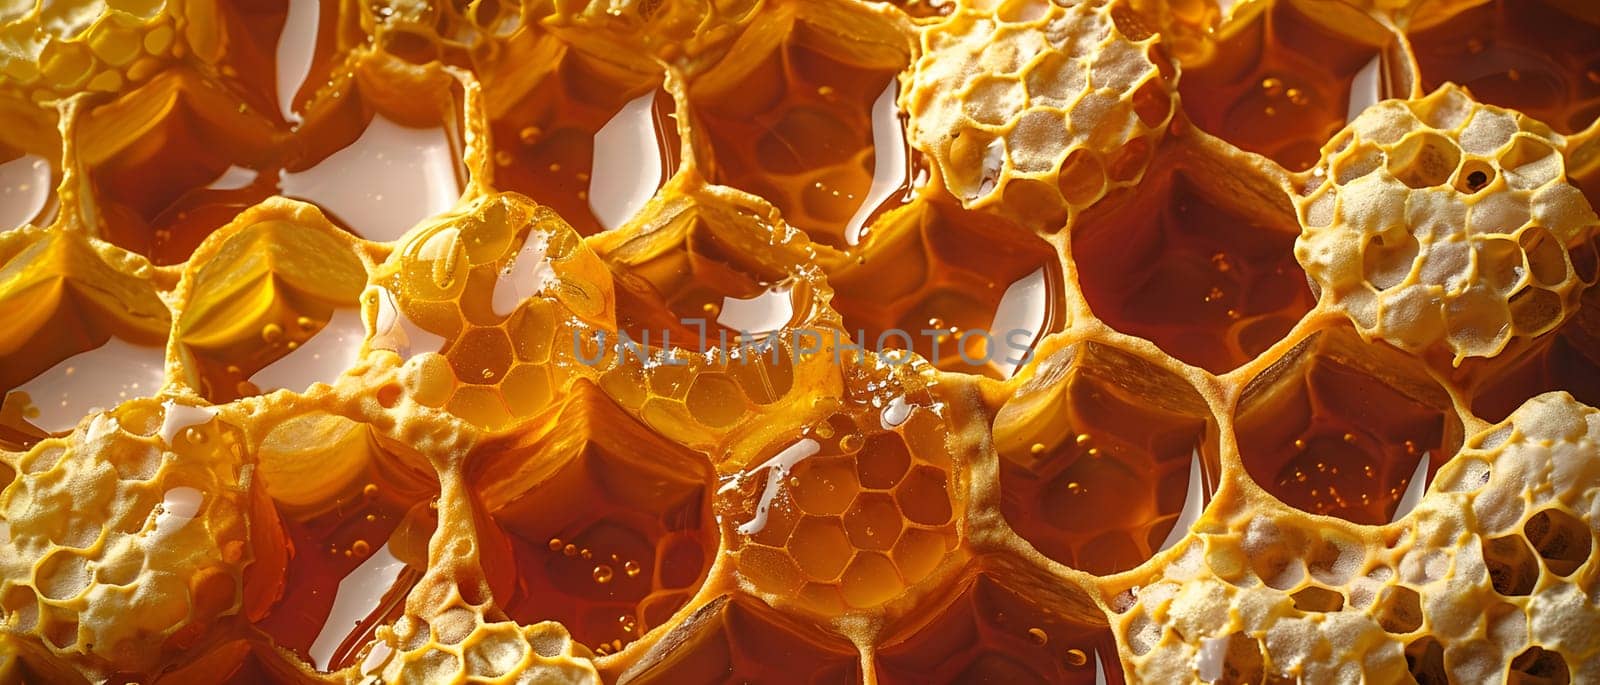 A macro photograph showing a close up of a honeycomb filled with golden amber honey. The natural material forms a beautiful pattern, resembling peachcolored art